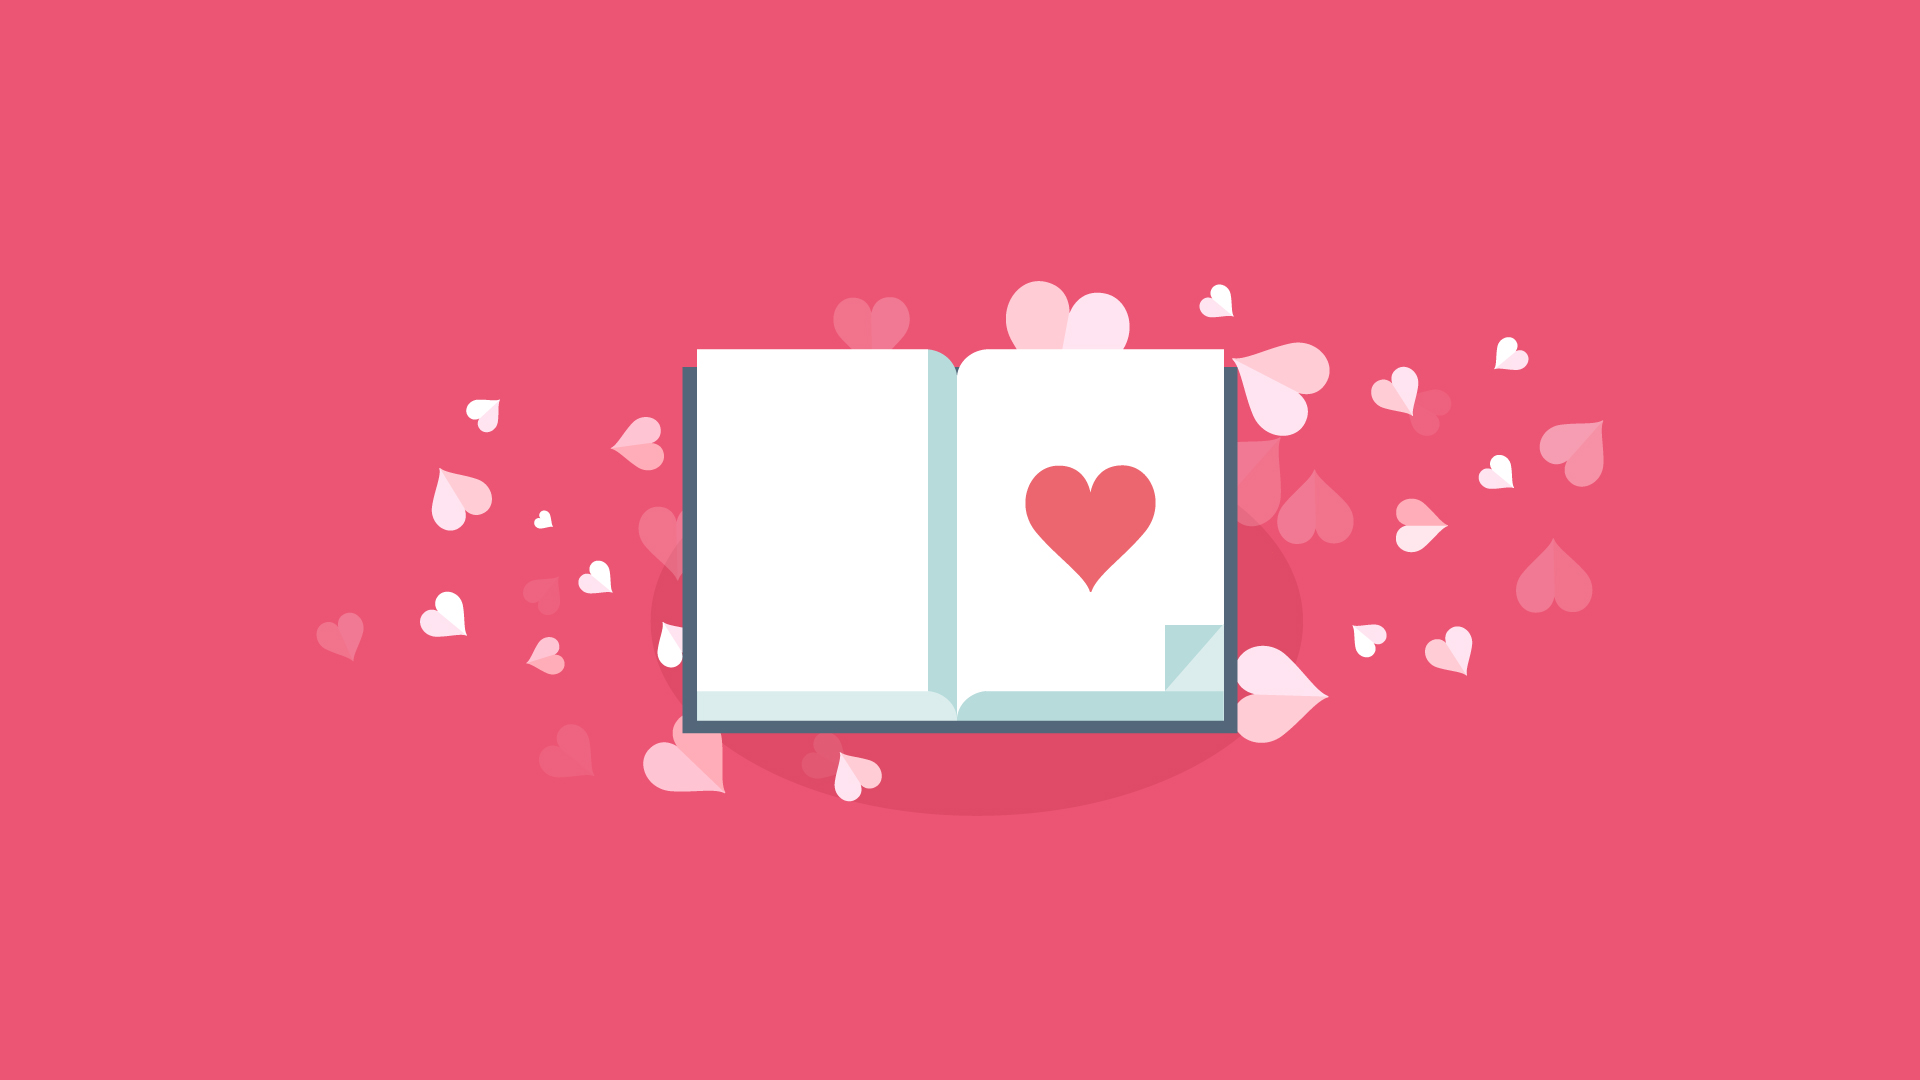 Opened book with light pink love hearts around its edges and a dark pink love heart on its right page. Dark pink background.